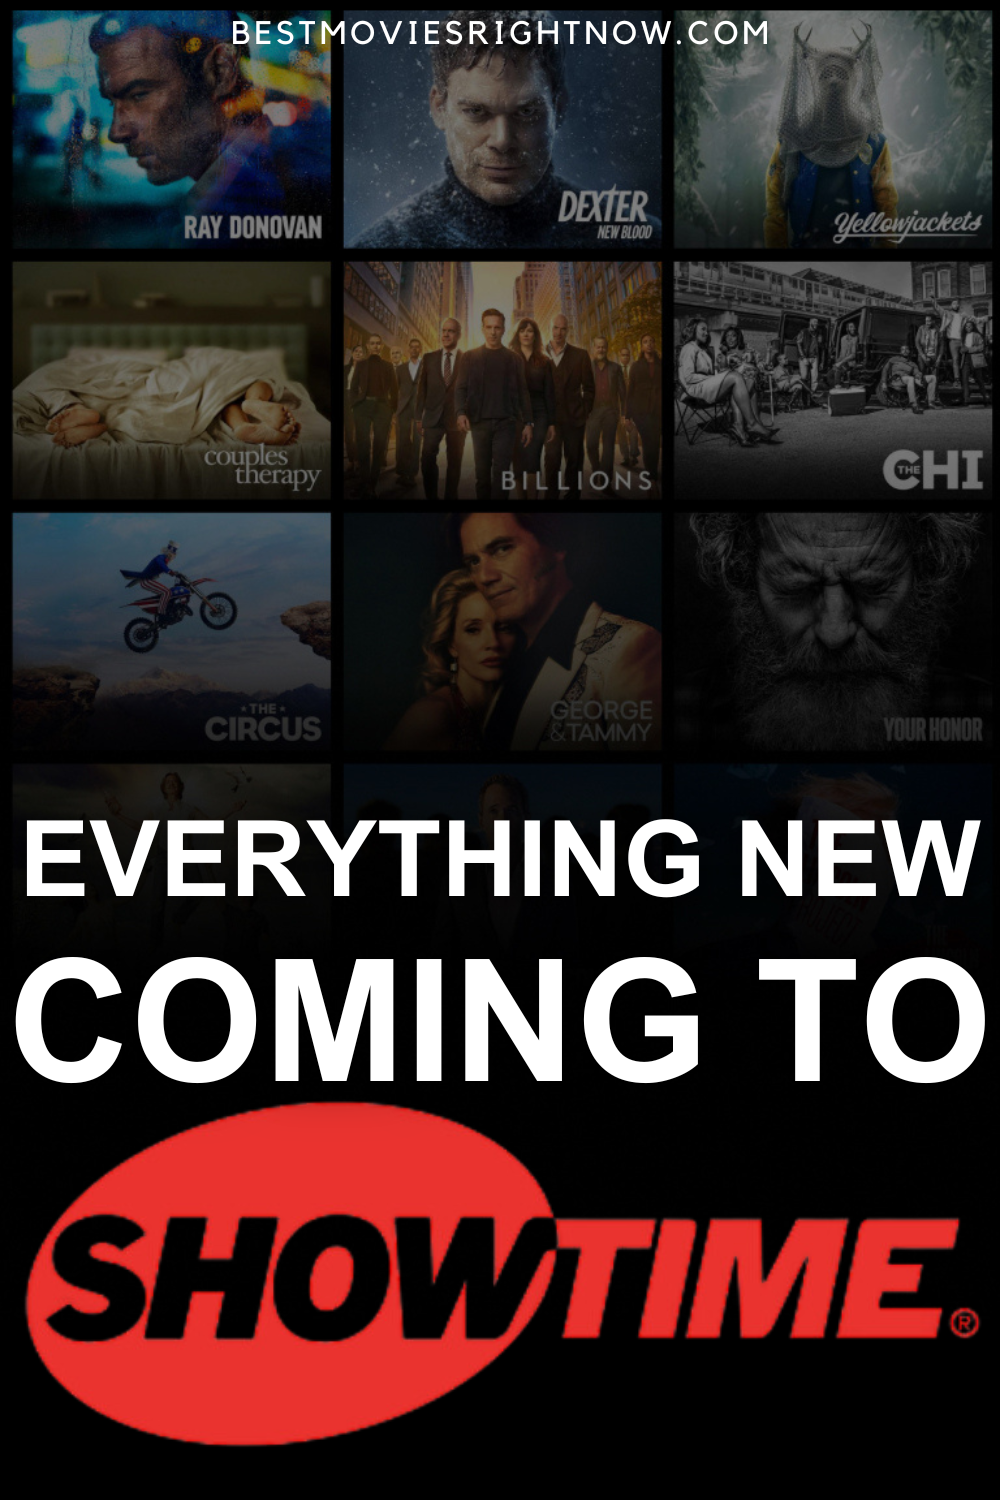 pin-sized image of new to showtime with text overlay